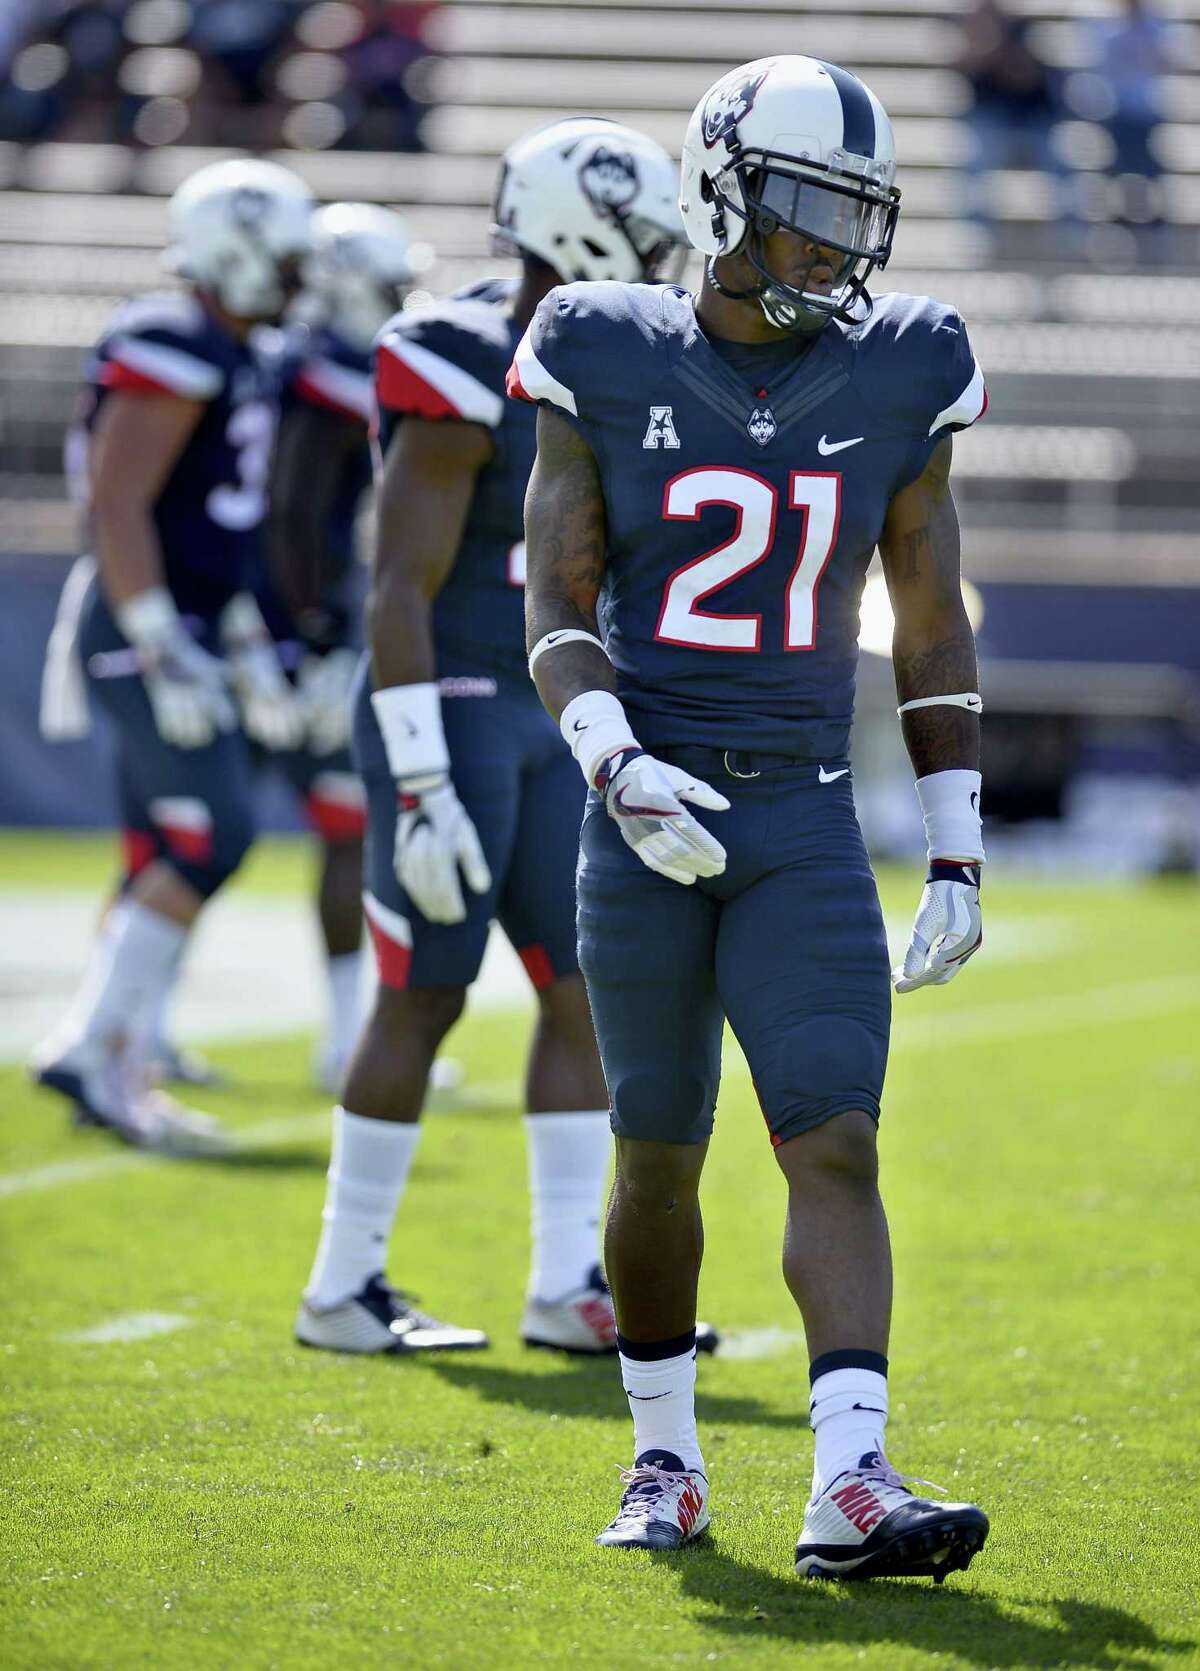 UConn’s Jamar Summers warms up before last Saturday’s game at Rentschler Field.